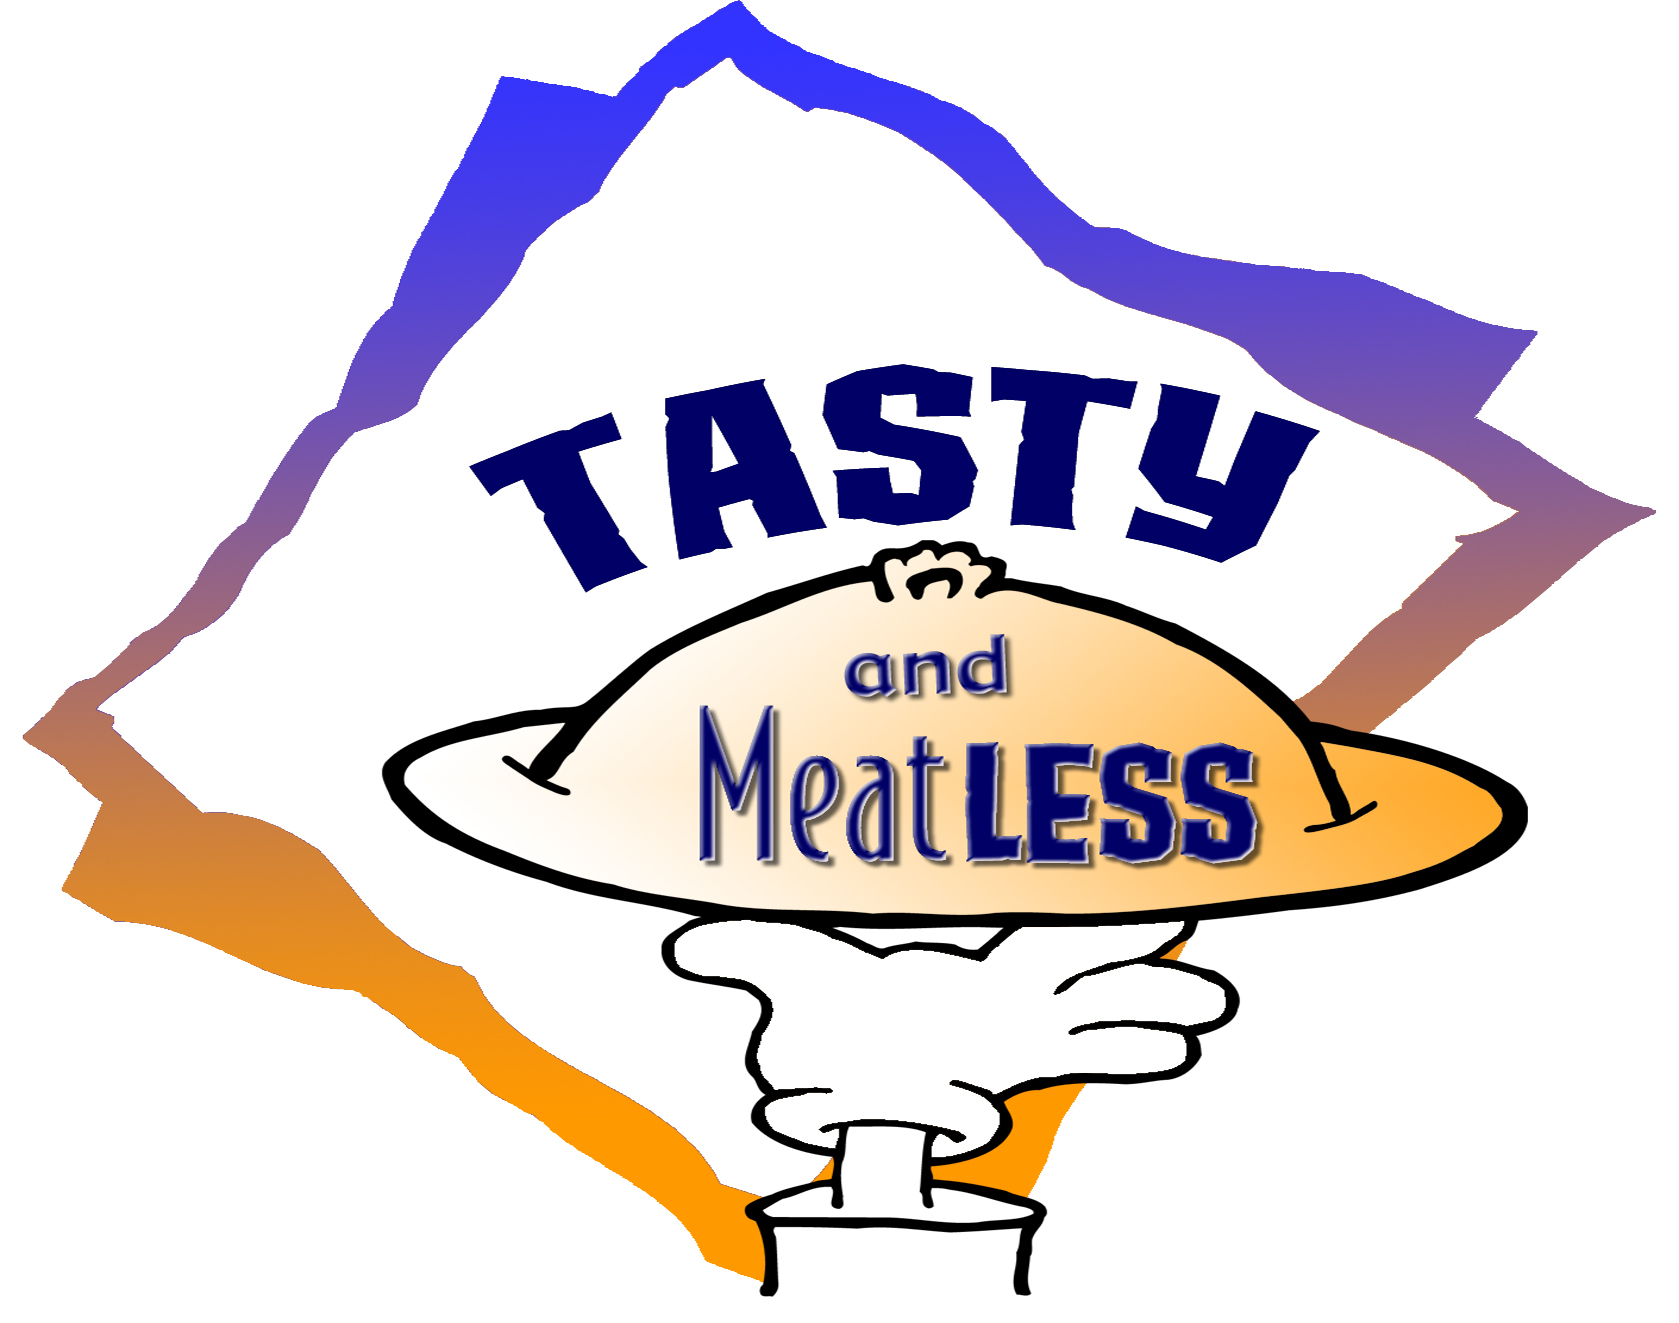 Tasty and Meatless